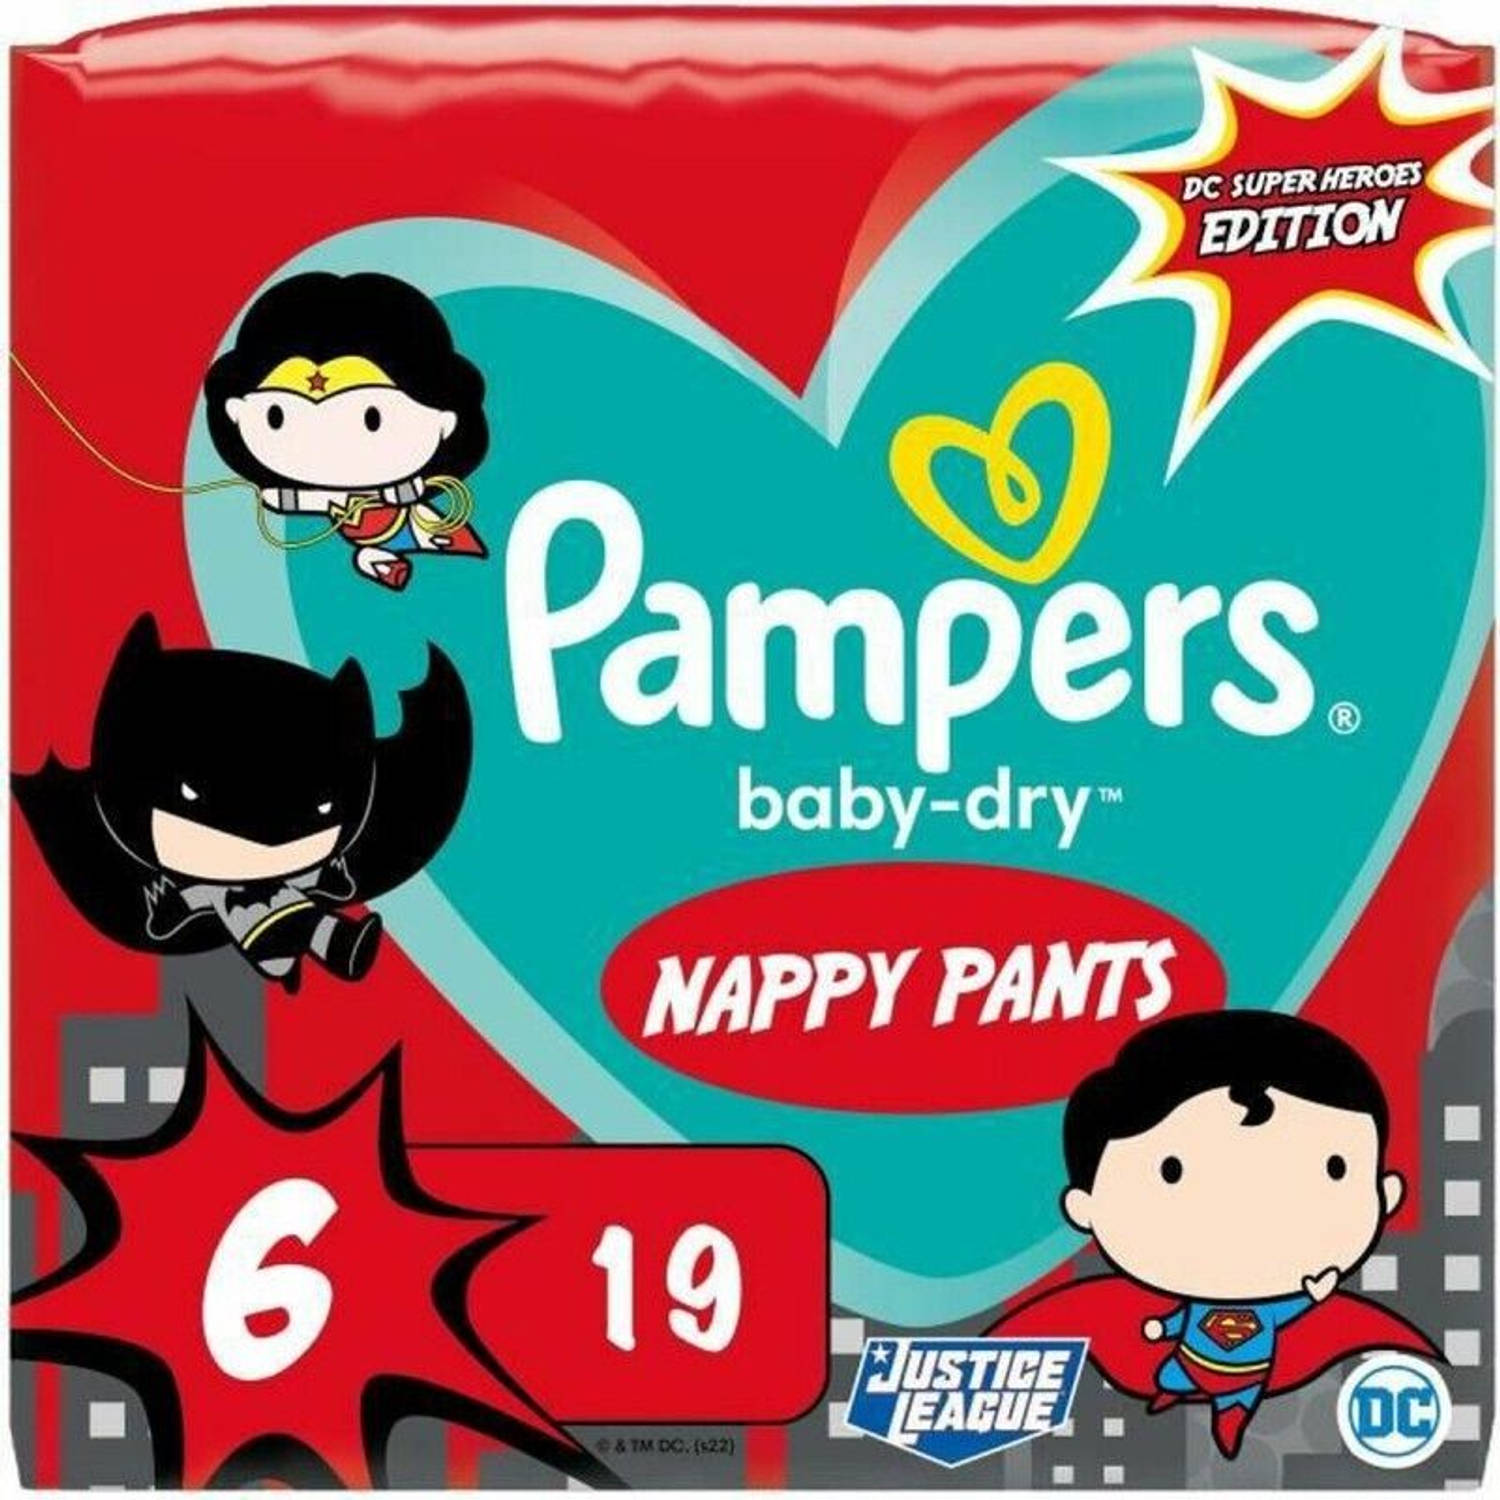 Pampers Broek Baby Dry Gr.6 Extra Large, 15+ kg, Superheroes Limited Edition, 19 St